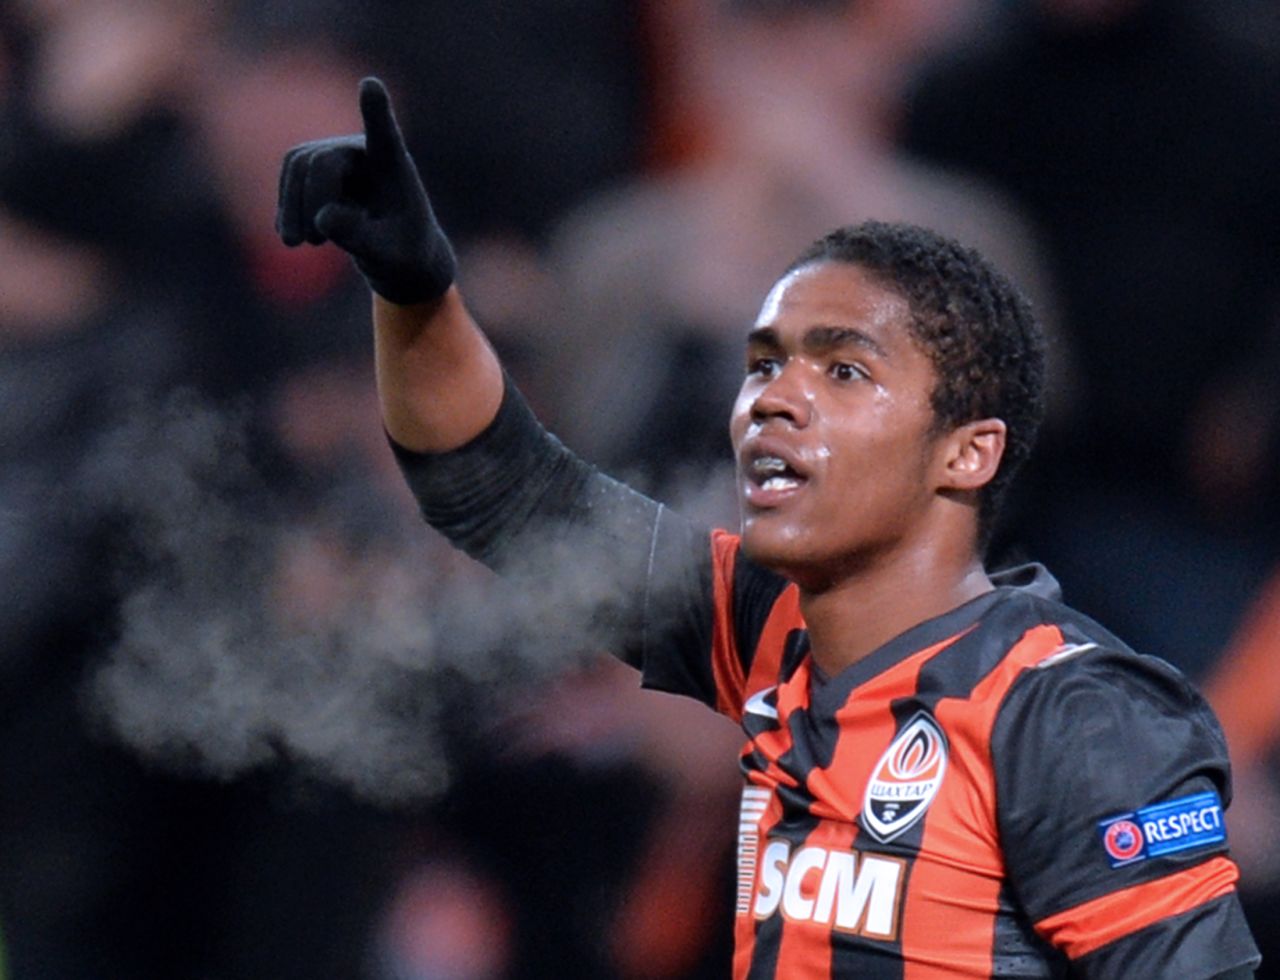 Shakhtar Donetsk is struggling to keep hold of its star players due to the ongoing conflict in Ukraine. It will hope that the situation won't detract from its chances of success in the competition.